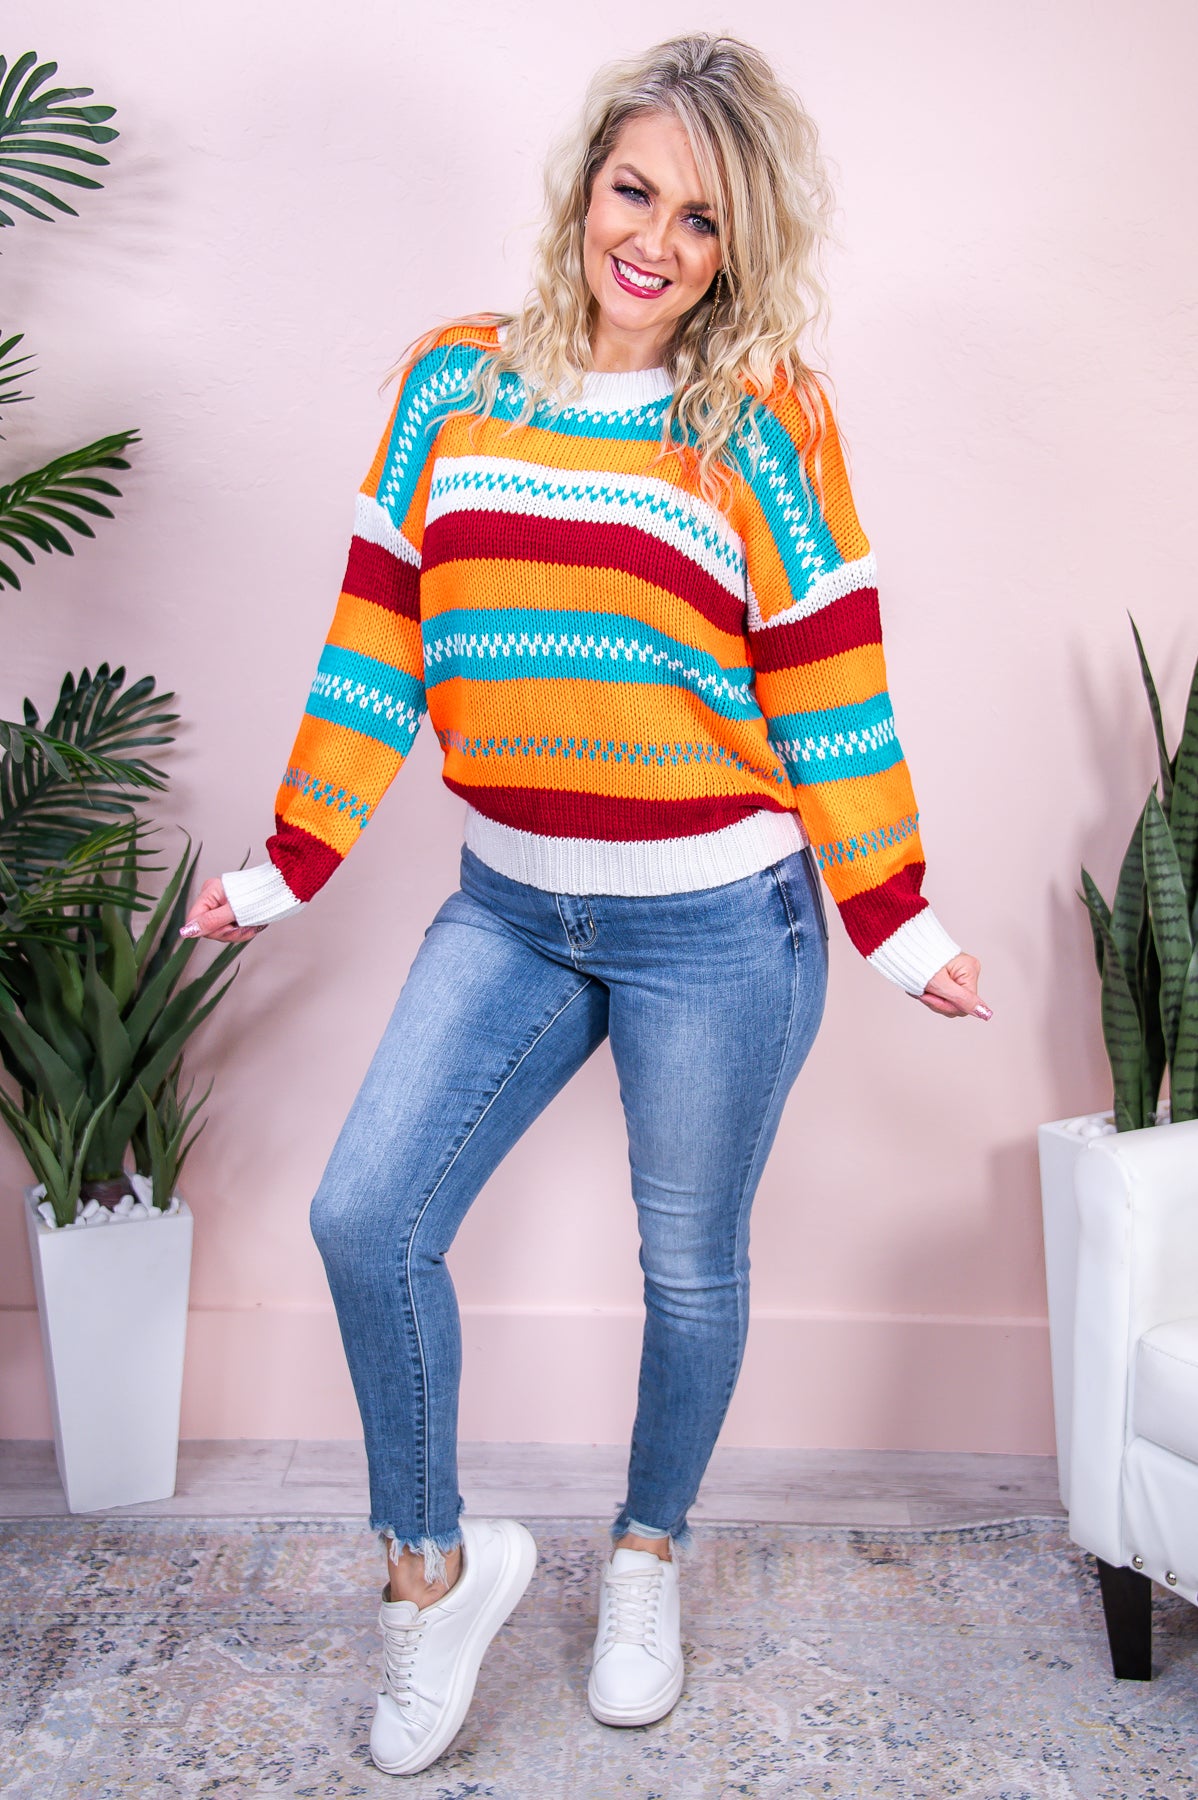 Nothing Can Compare Neon Orange/Multi Color Striped Sweater Top - T8516NOR